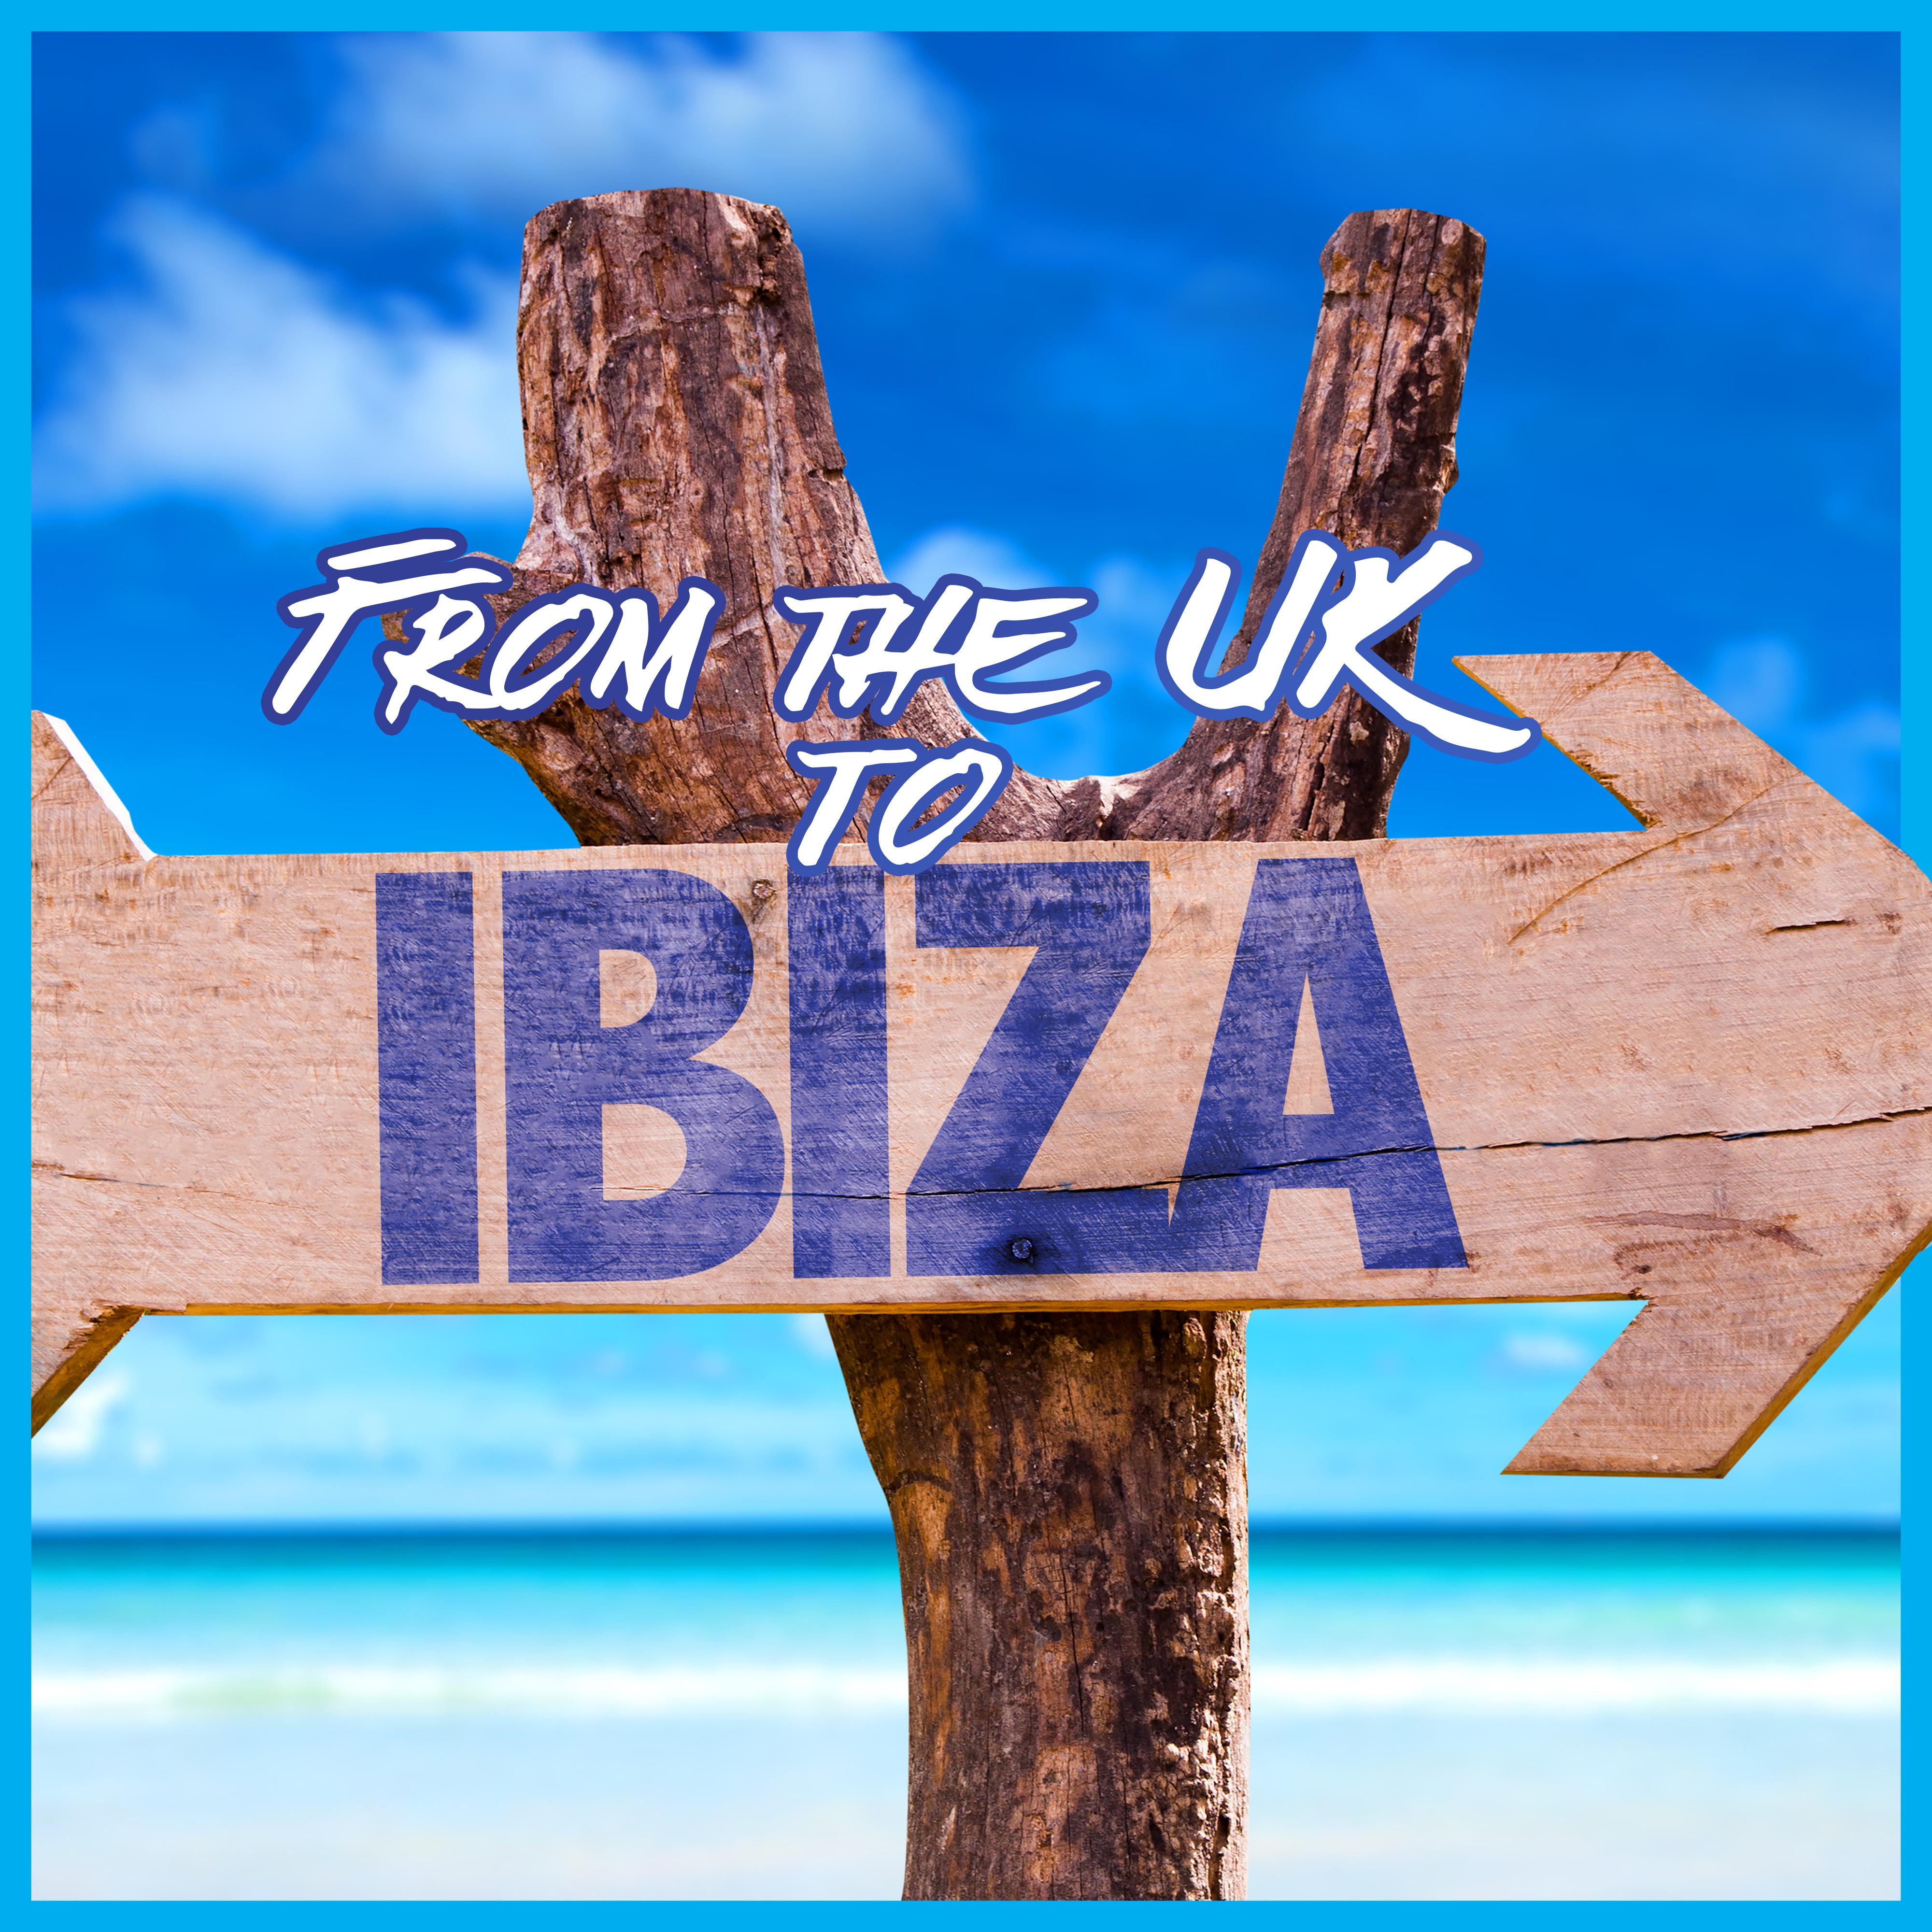 From the UK to Ibiza - Best Tropical Chillout Music for Parties, Holidays, for Dancing and Fun